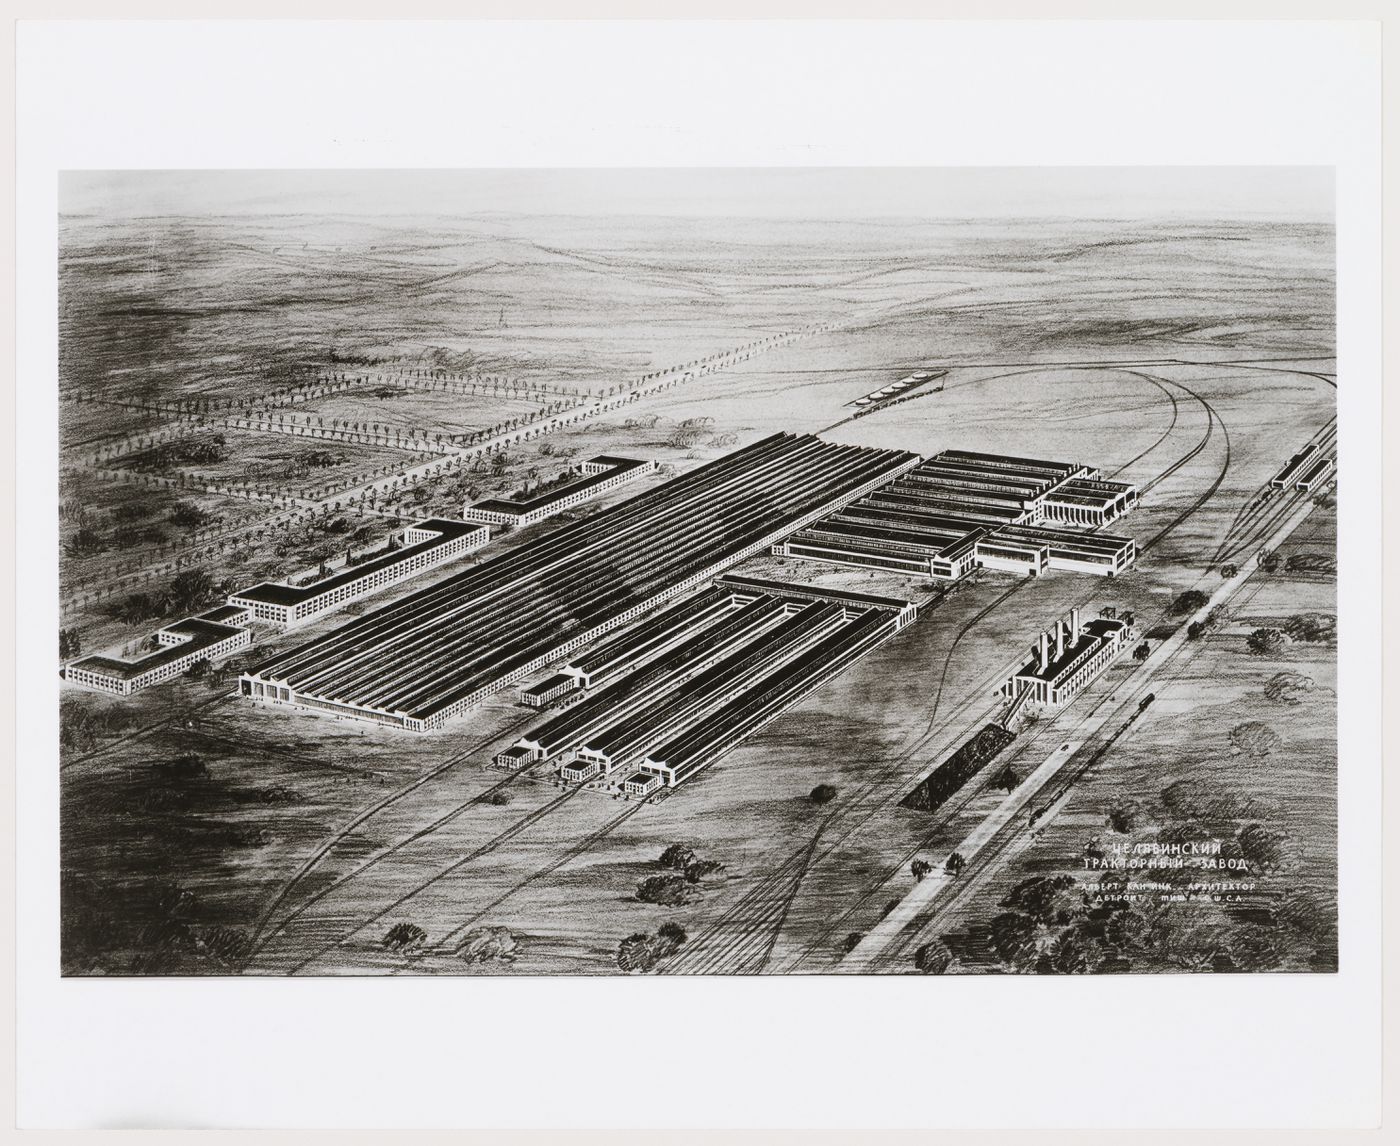 Photograph of a bird's-eye perspective drawing for or of the Soviet Diesel Tractor Assembly Plant, Cheliabinsk, Soviet Union (now in Russia)